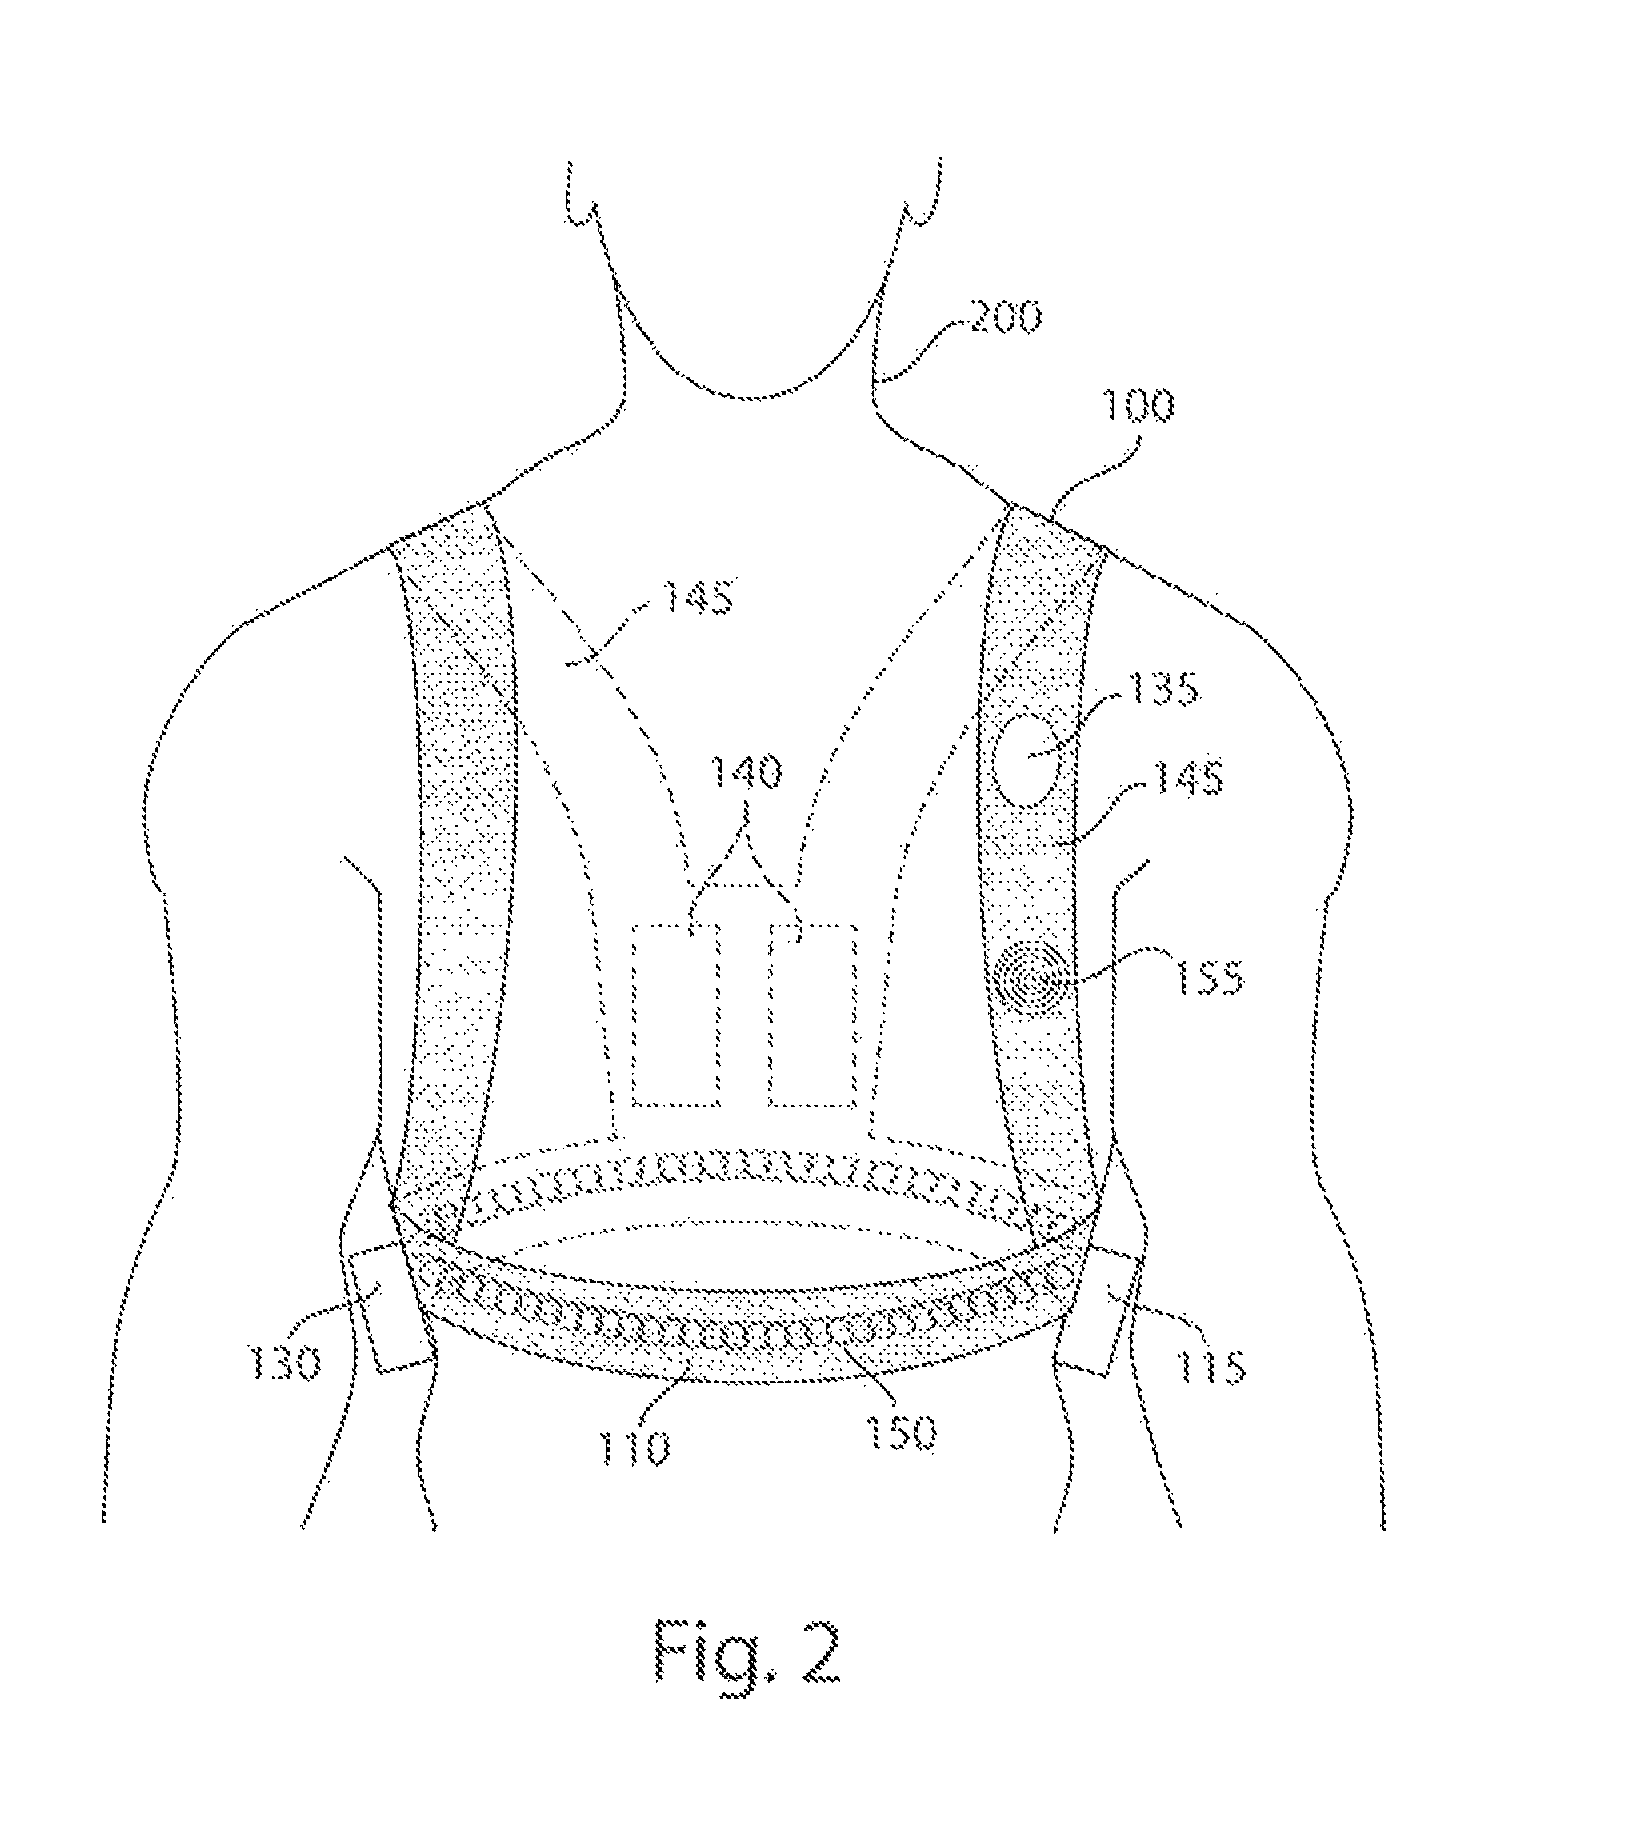 Wearable monitoring and treatment device